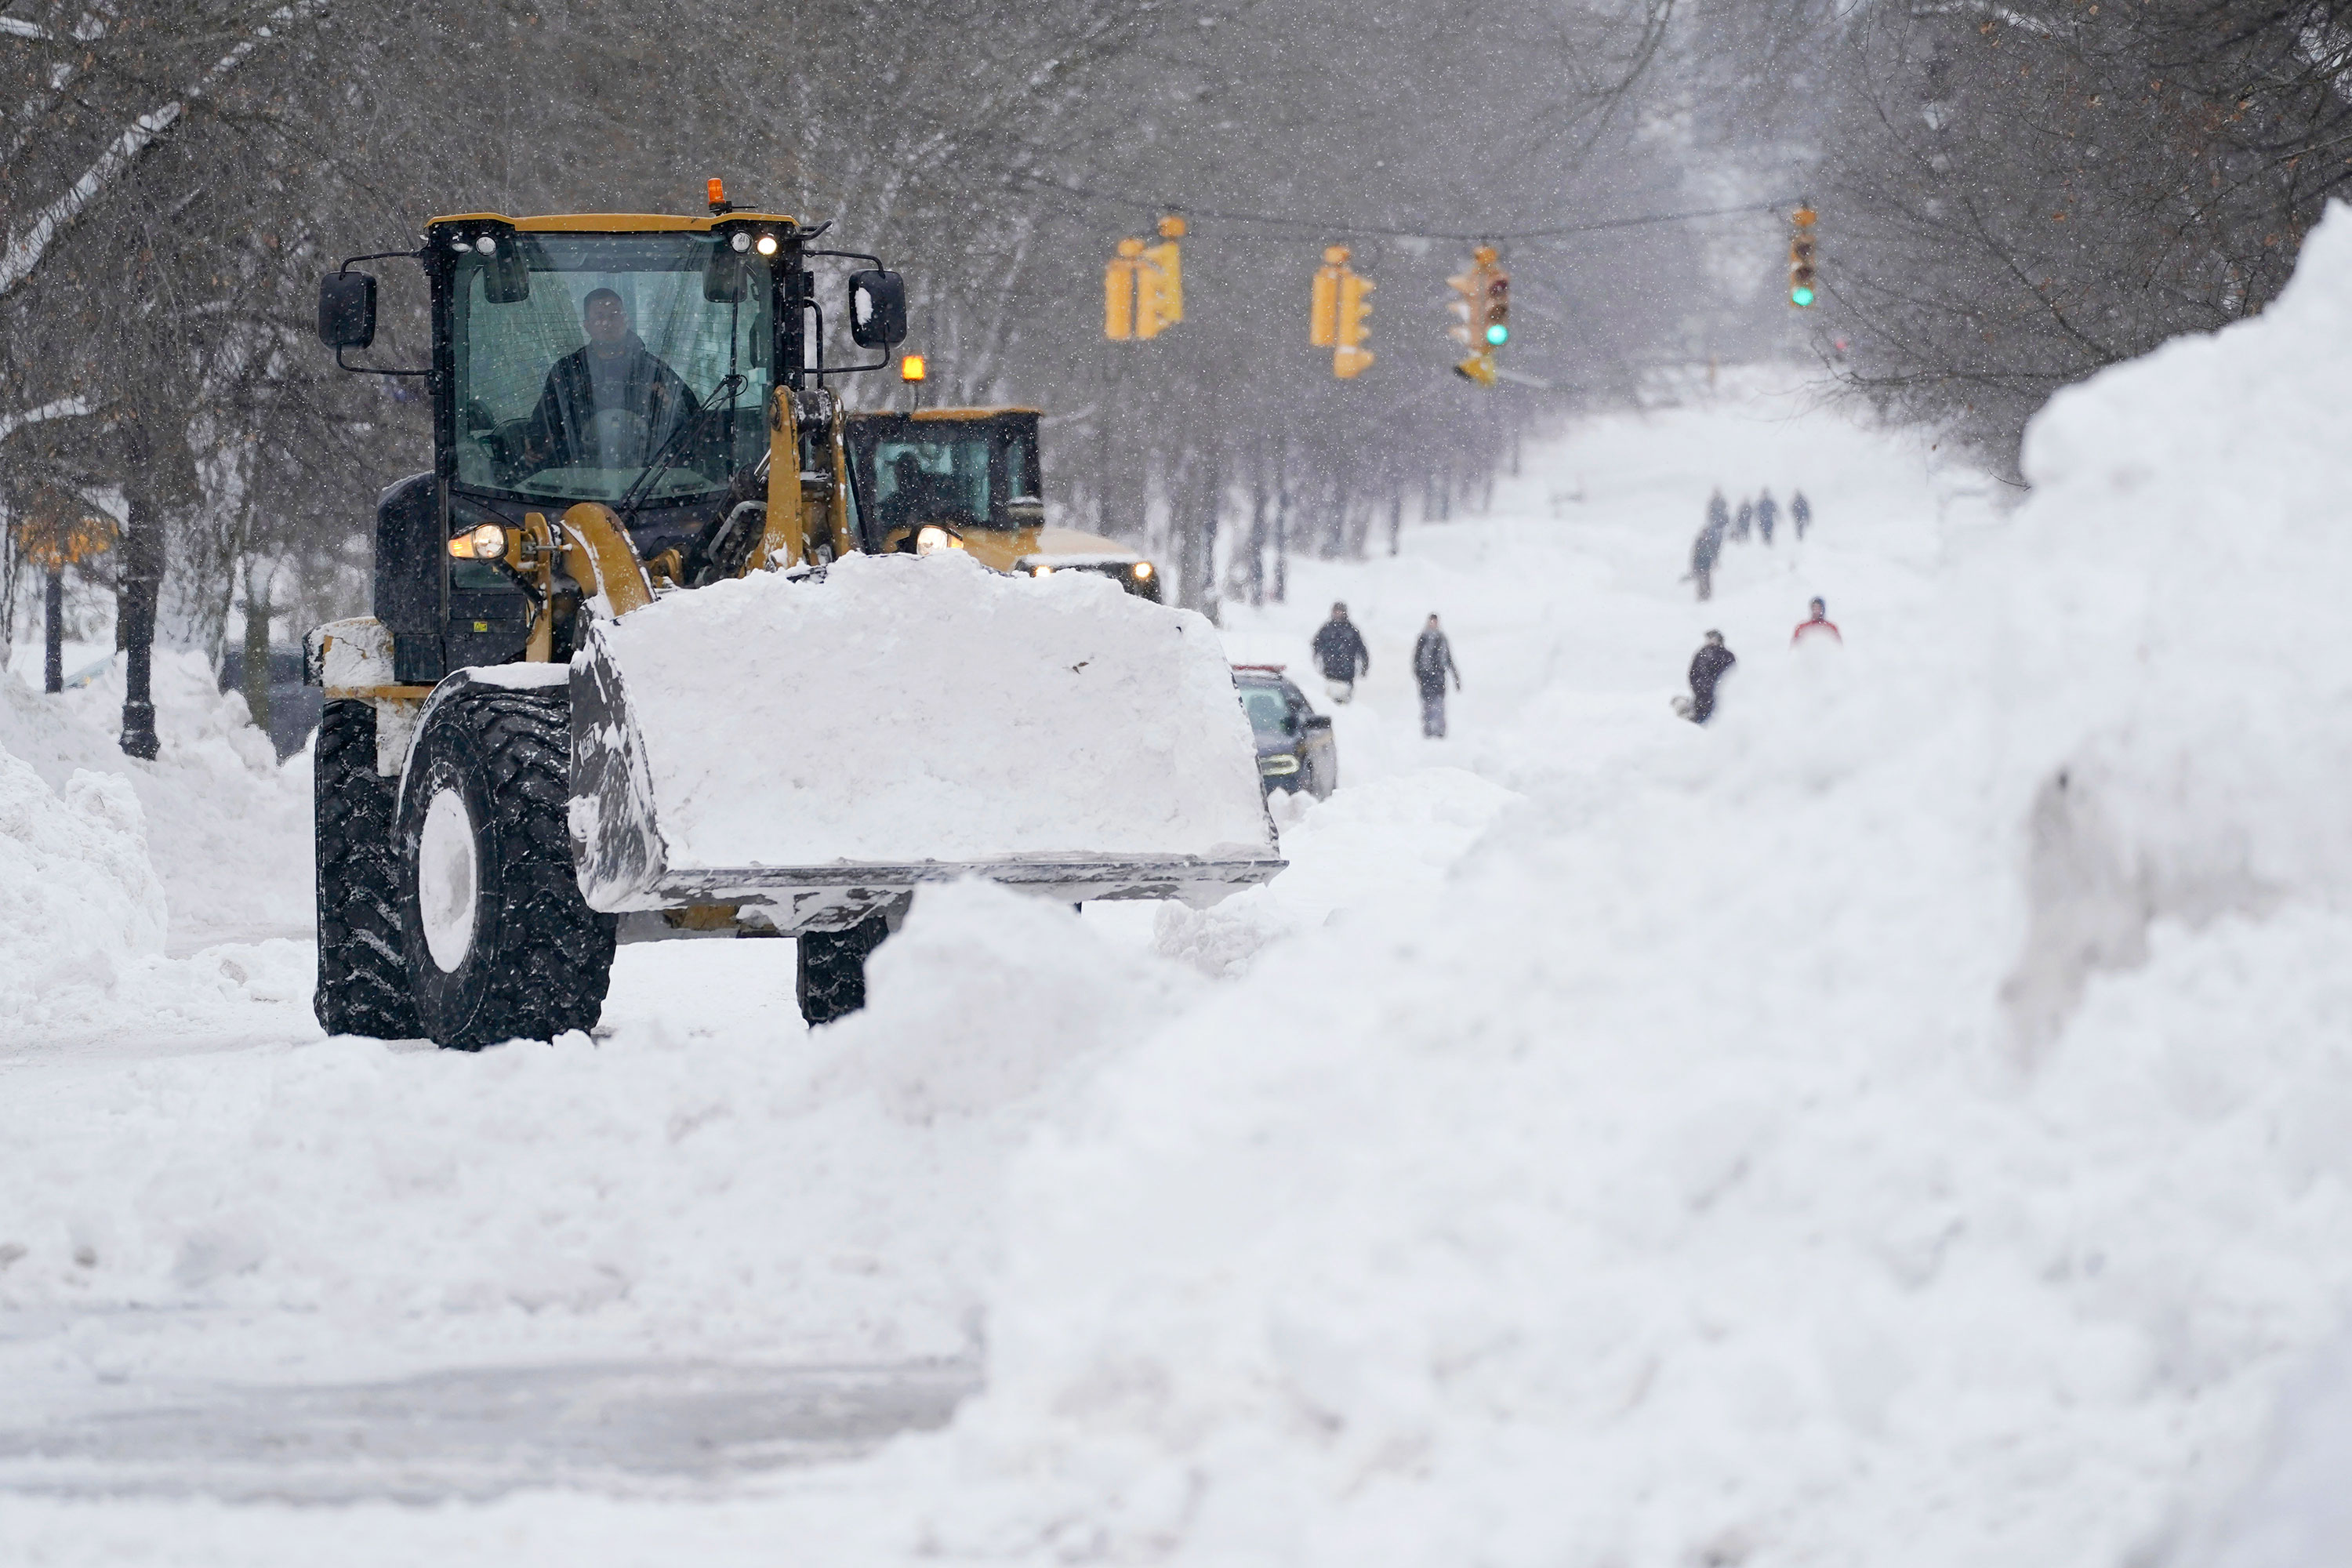 Workers use heavy equipment to clear snow from Richmond Avenue in Buffalo on Monday.